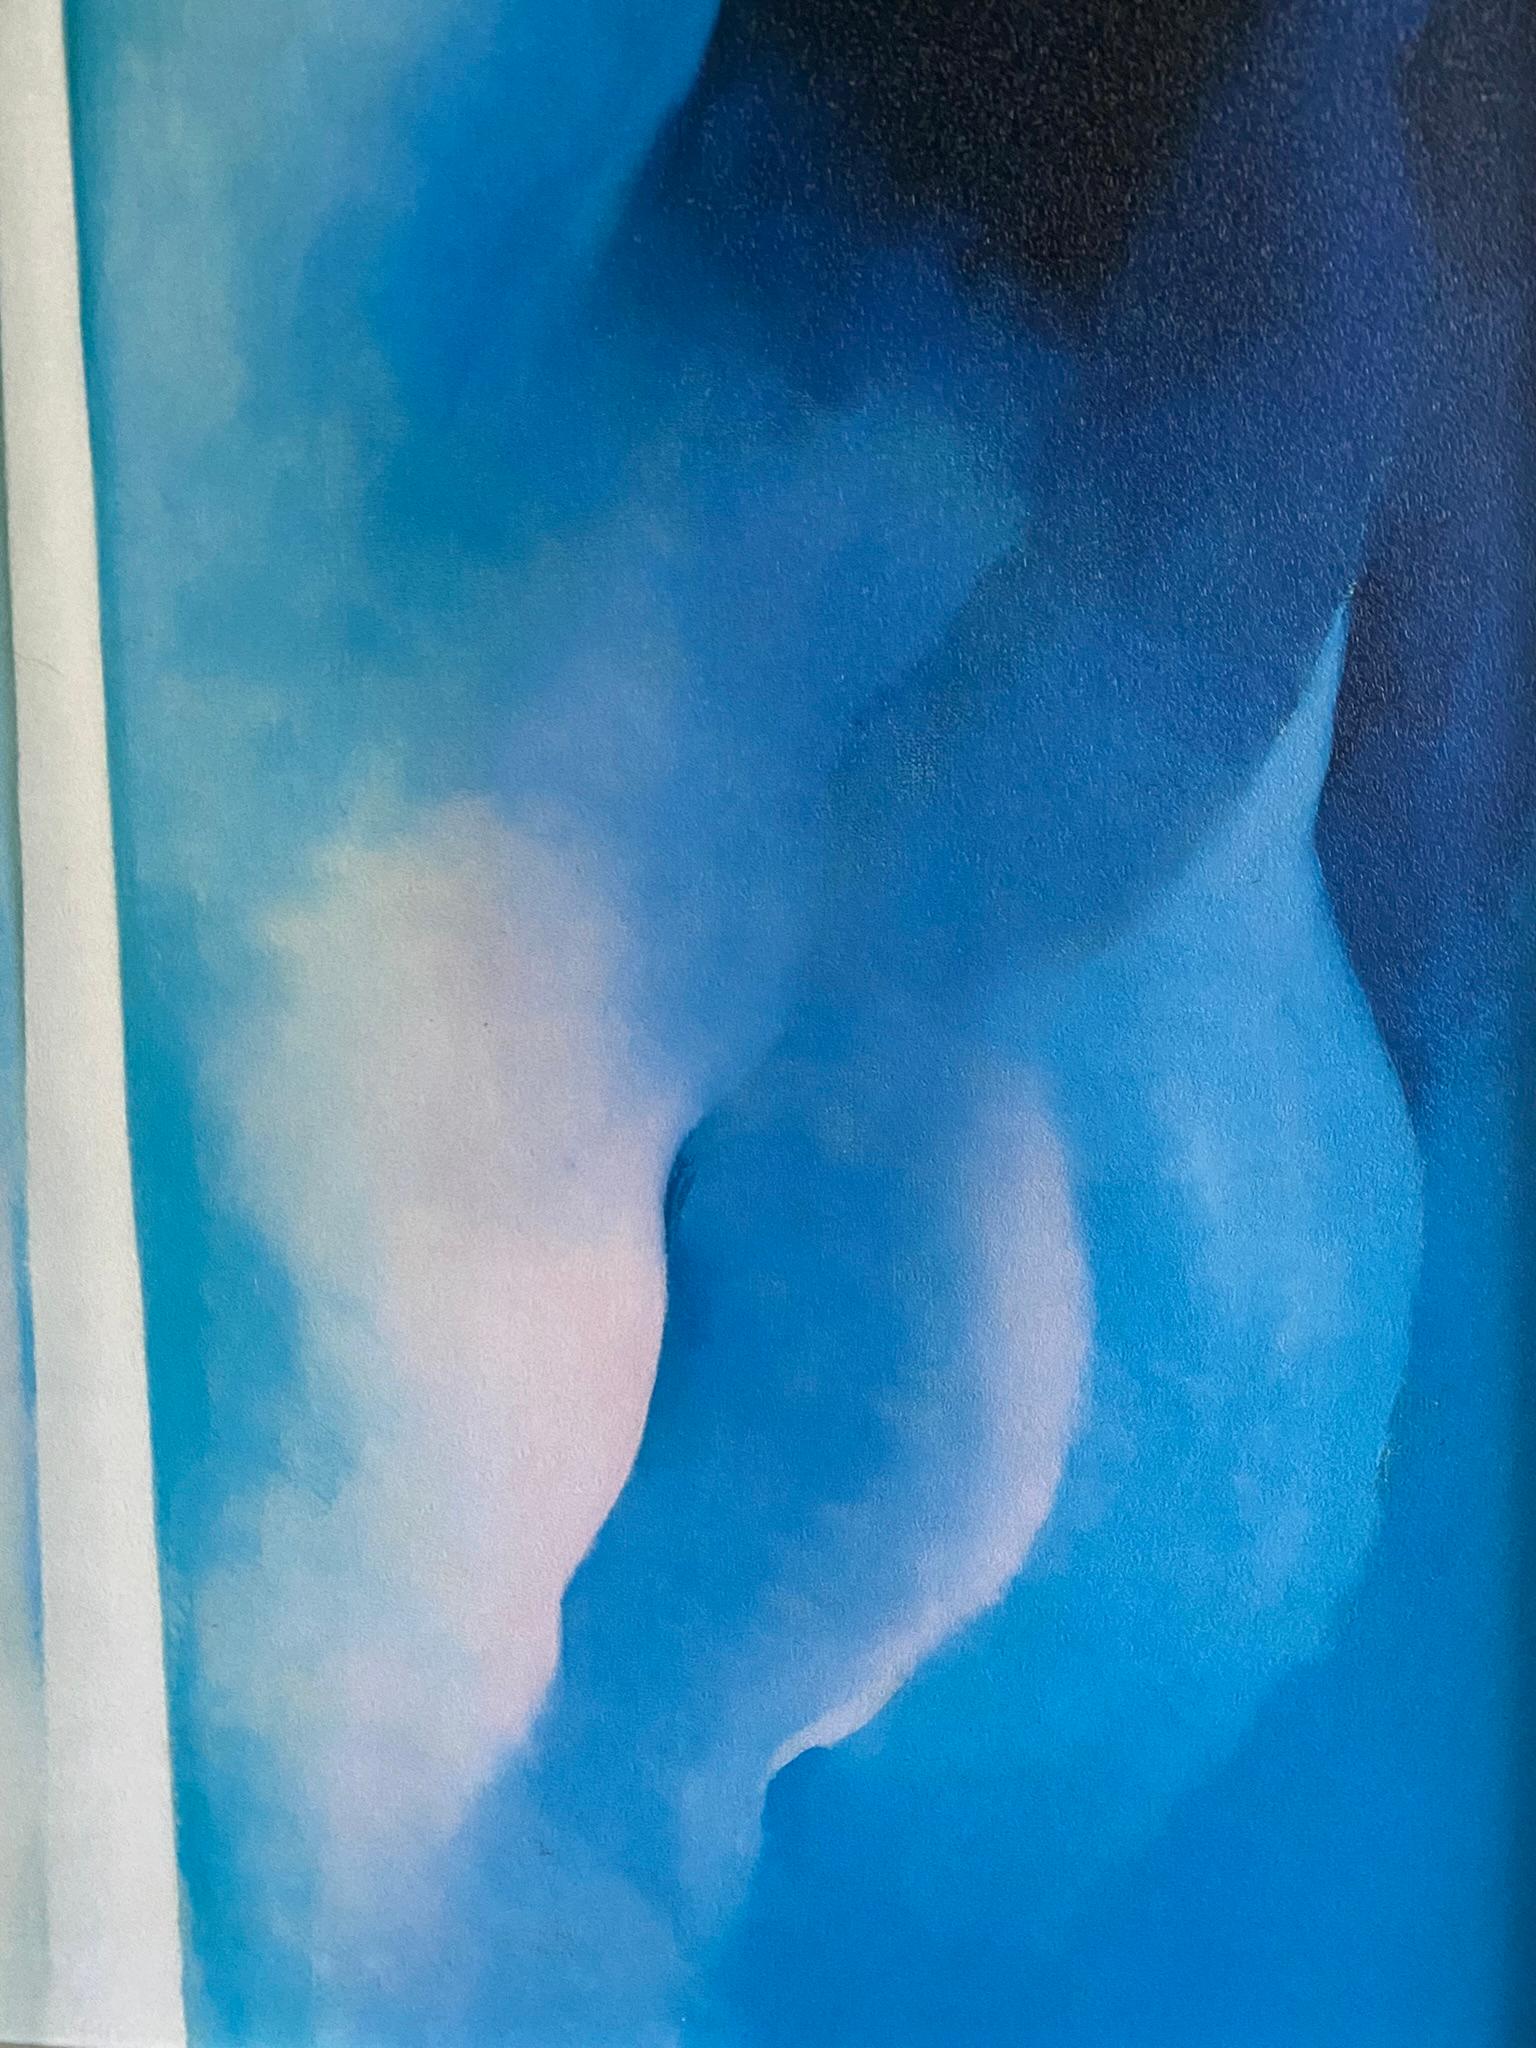 Georgia O'Keeffe-High Quality print by MoMA circa1997-Abstraction Blue-GSYStudio For Sale 9